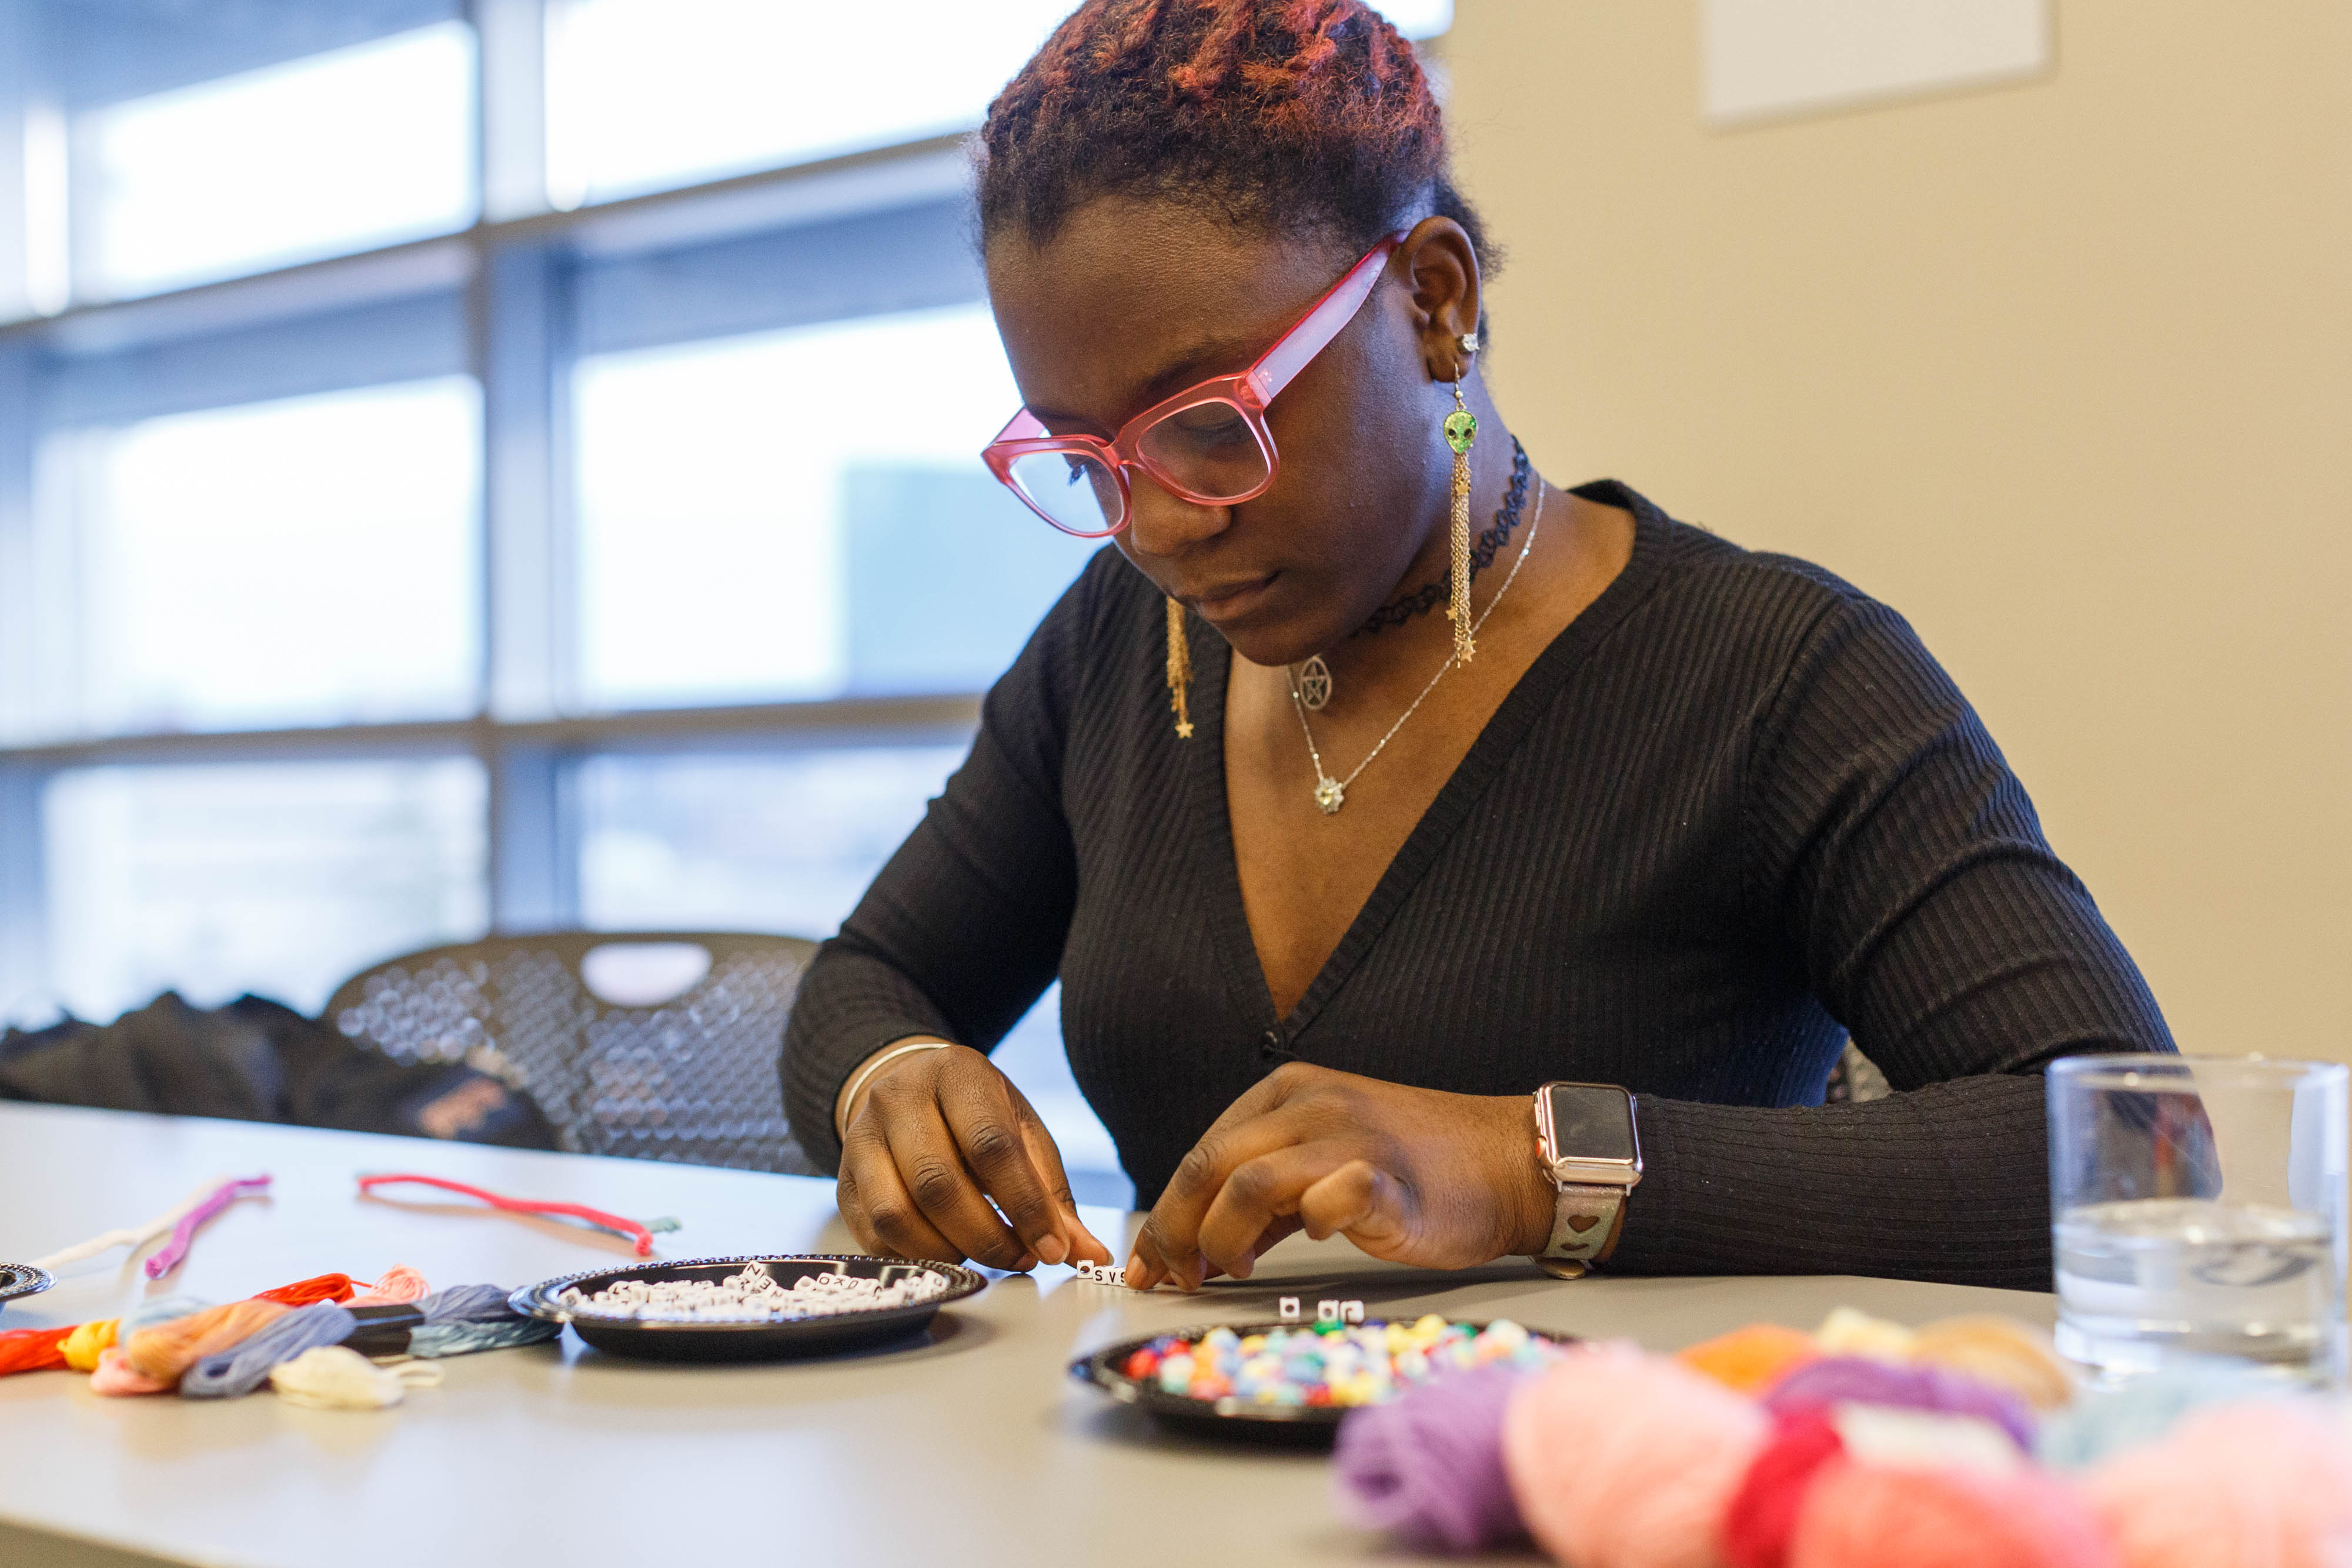 A woman is focused on making a personal wearable decoration